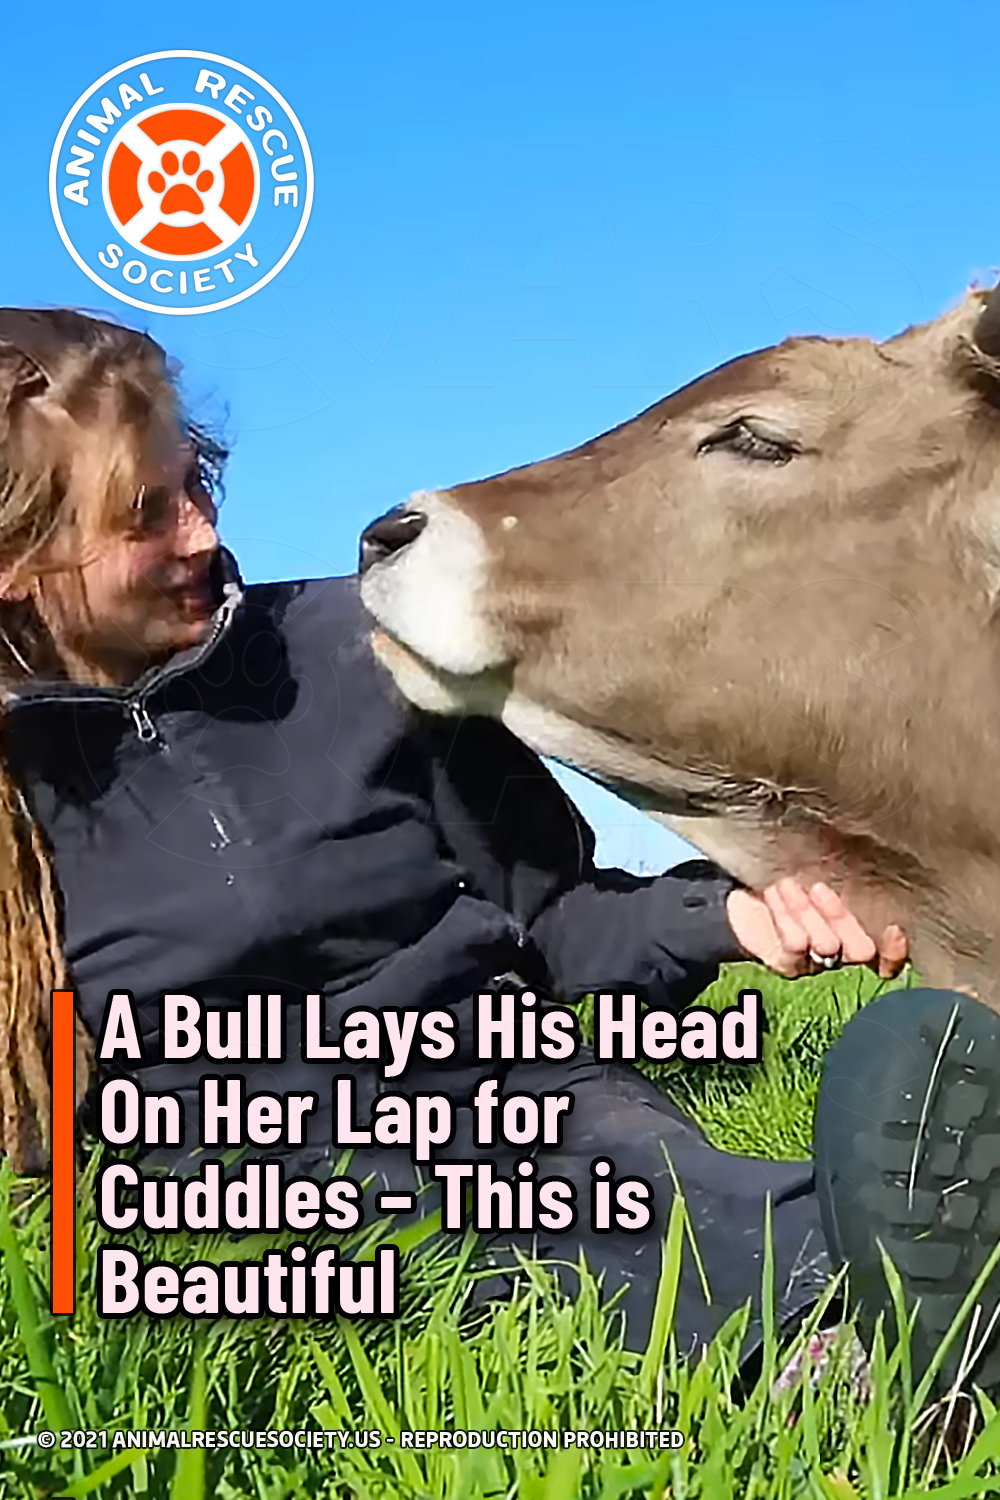 A Bull Lays His Head On Her Lap for Cuddles – This is Beautiful